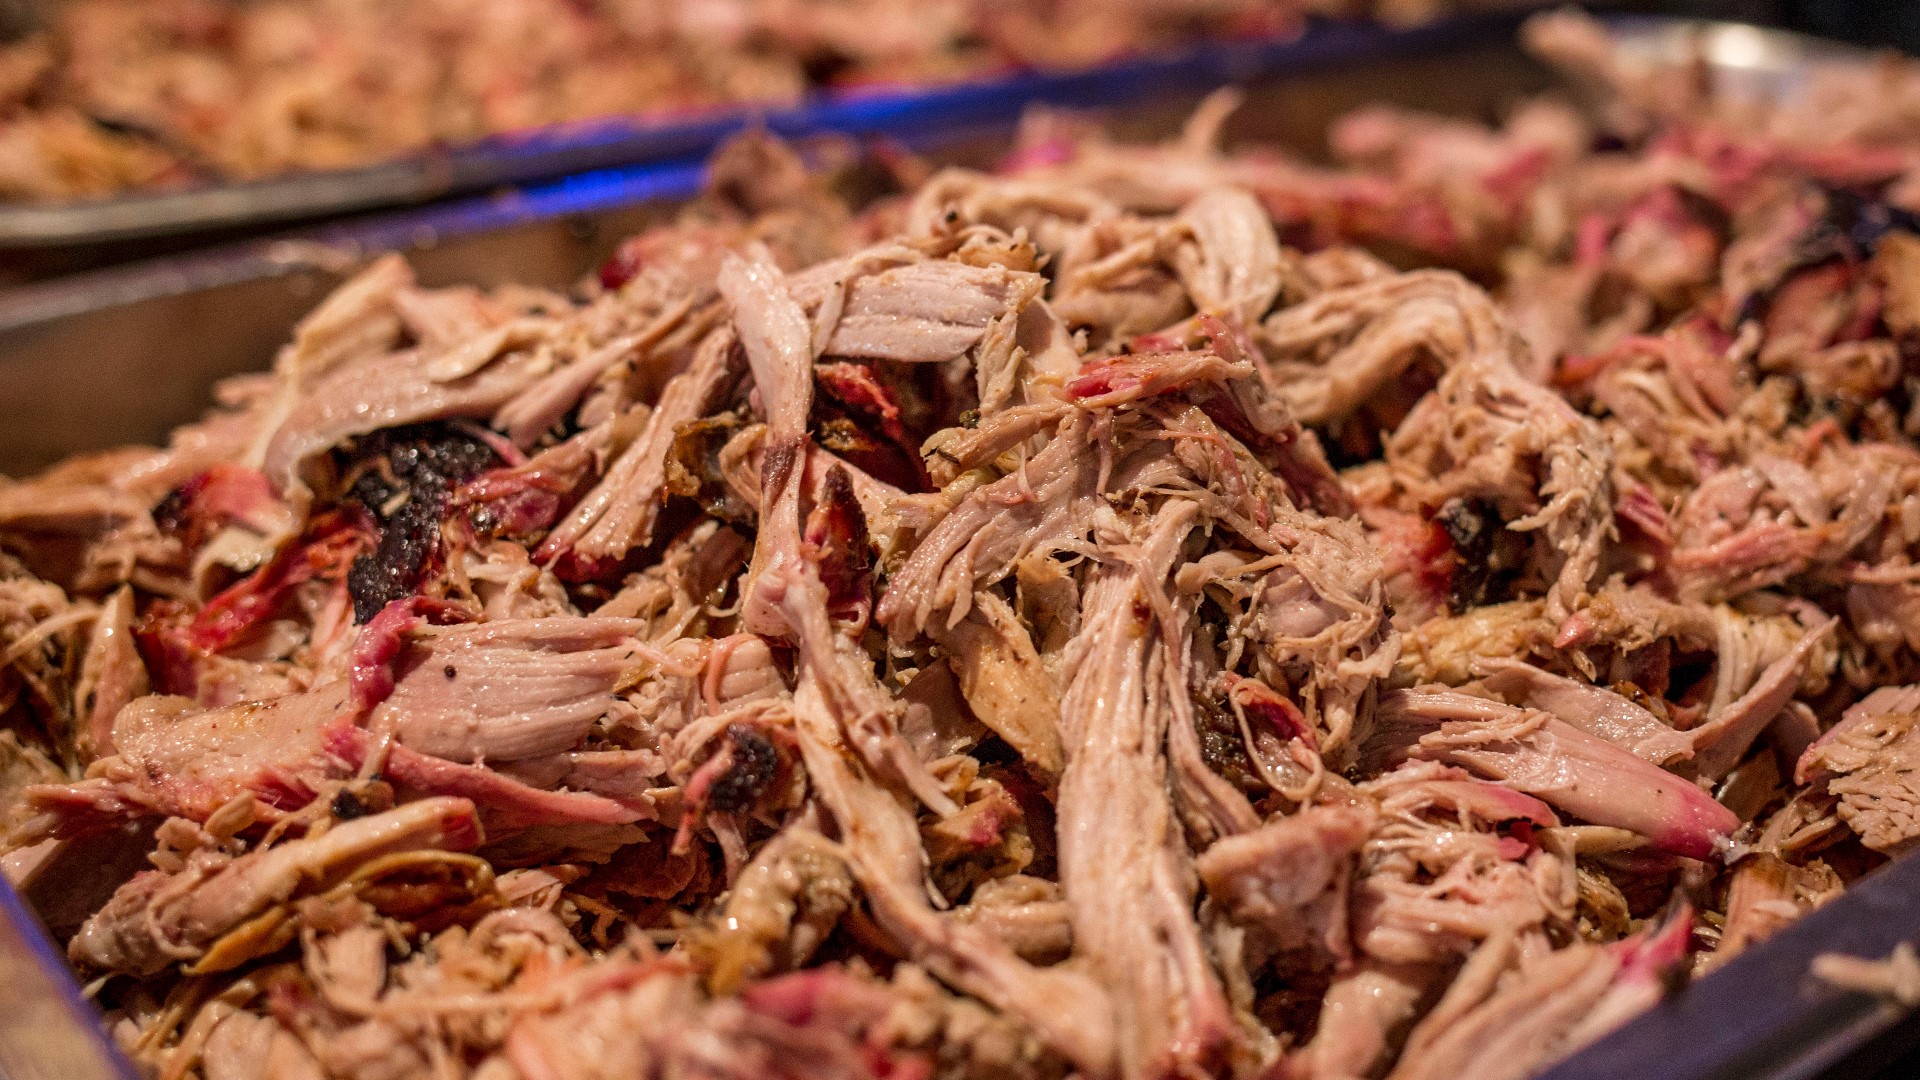 The Iowa Pork Producers Association is hosting its sixth annual Pulled Pork Madness Tournament. Past winners include Starbeck's Smokehouse, Moo's BBQ and more.